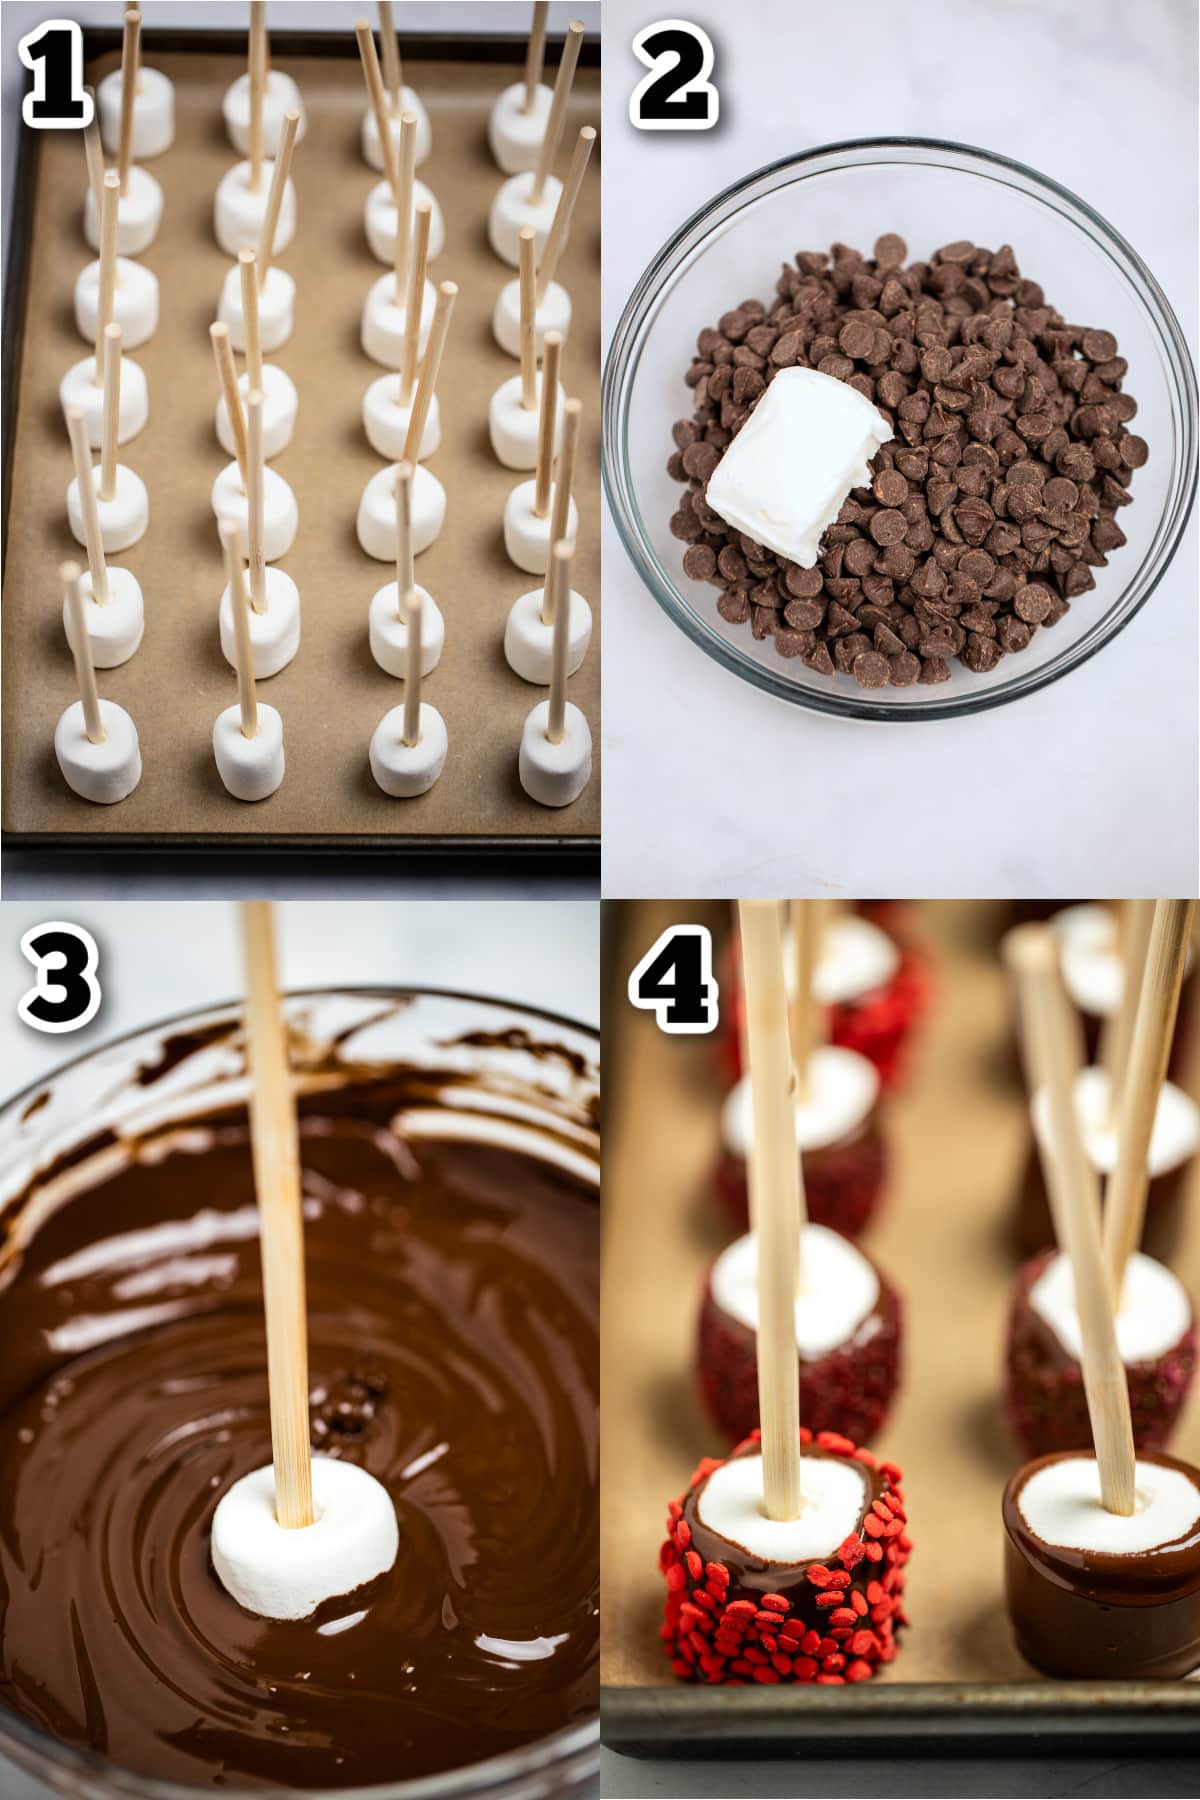 Step by step photos for how to make chocolate dipped marshmallows.